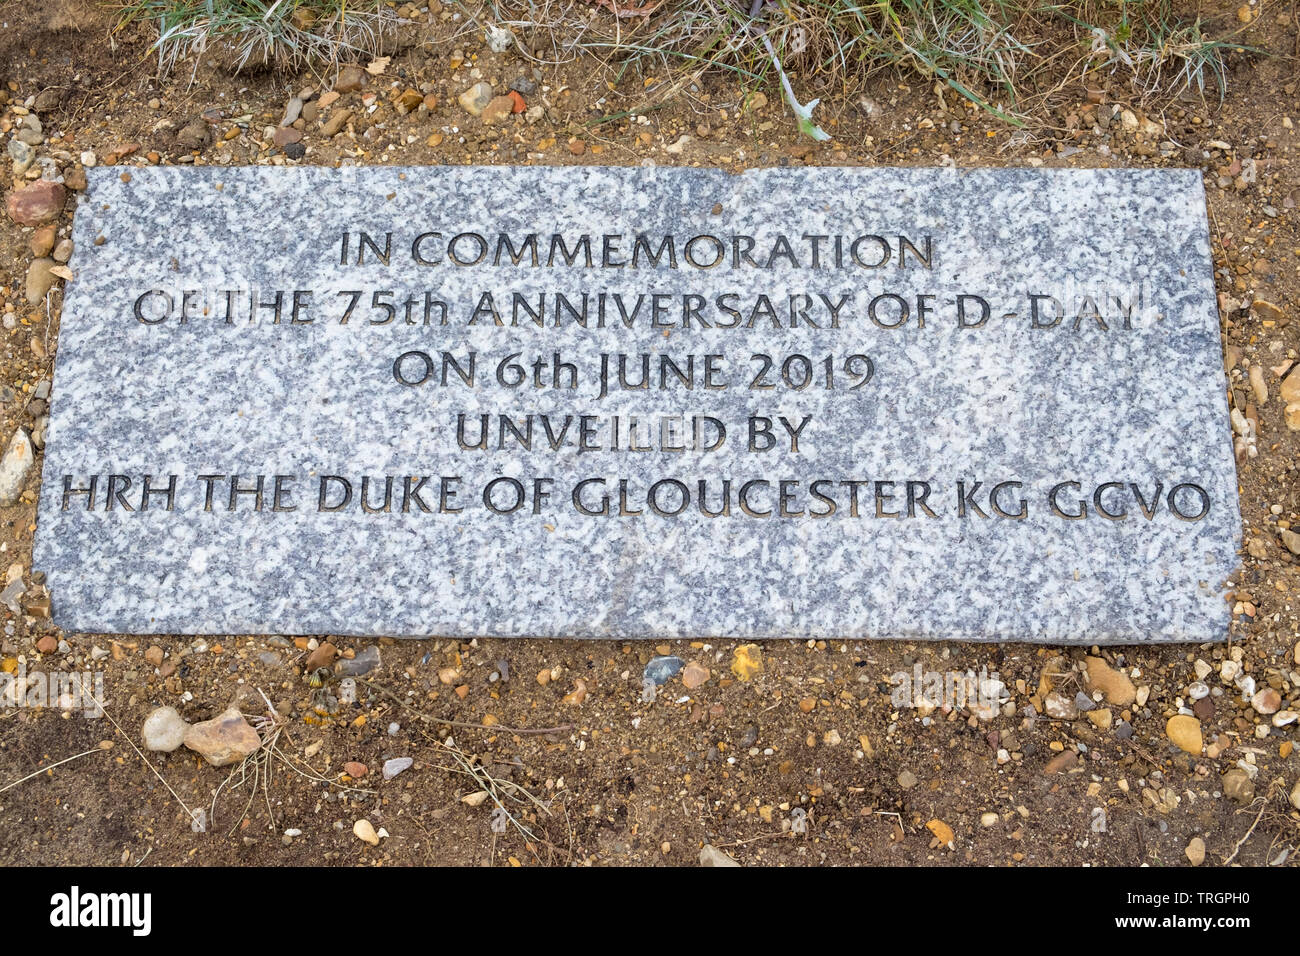 Stone Commemorating the 75th Anniversary of D Day on June 6th 2019.  Unveiled by HRH The Duke of Gloucester KG GCVO Stock Photo